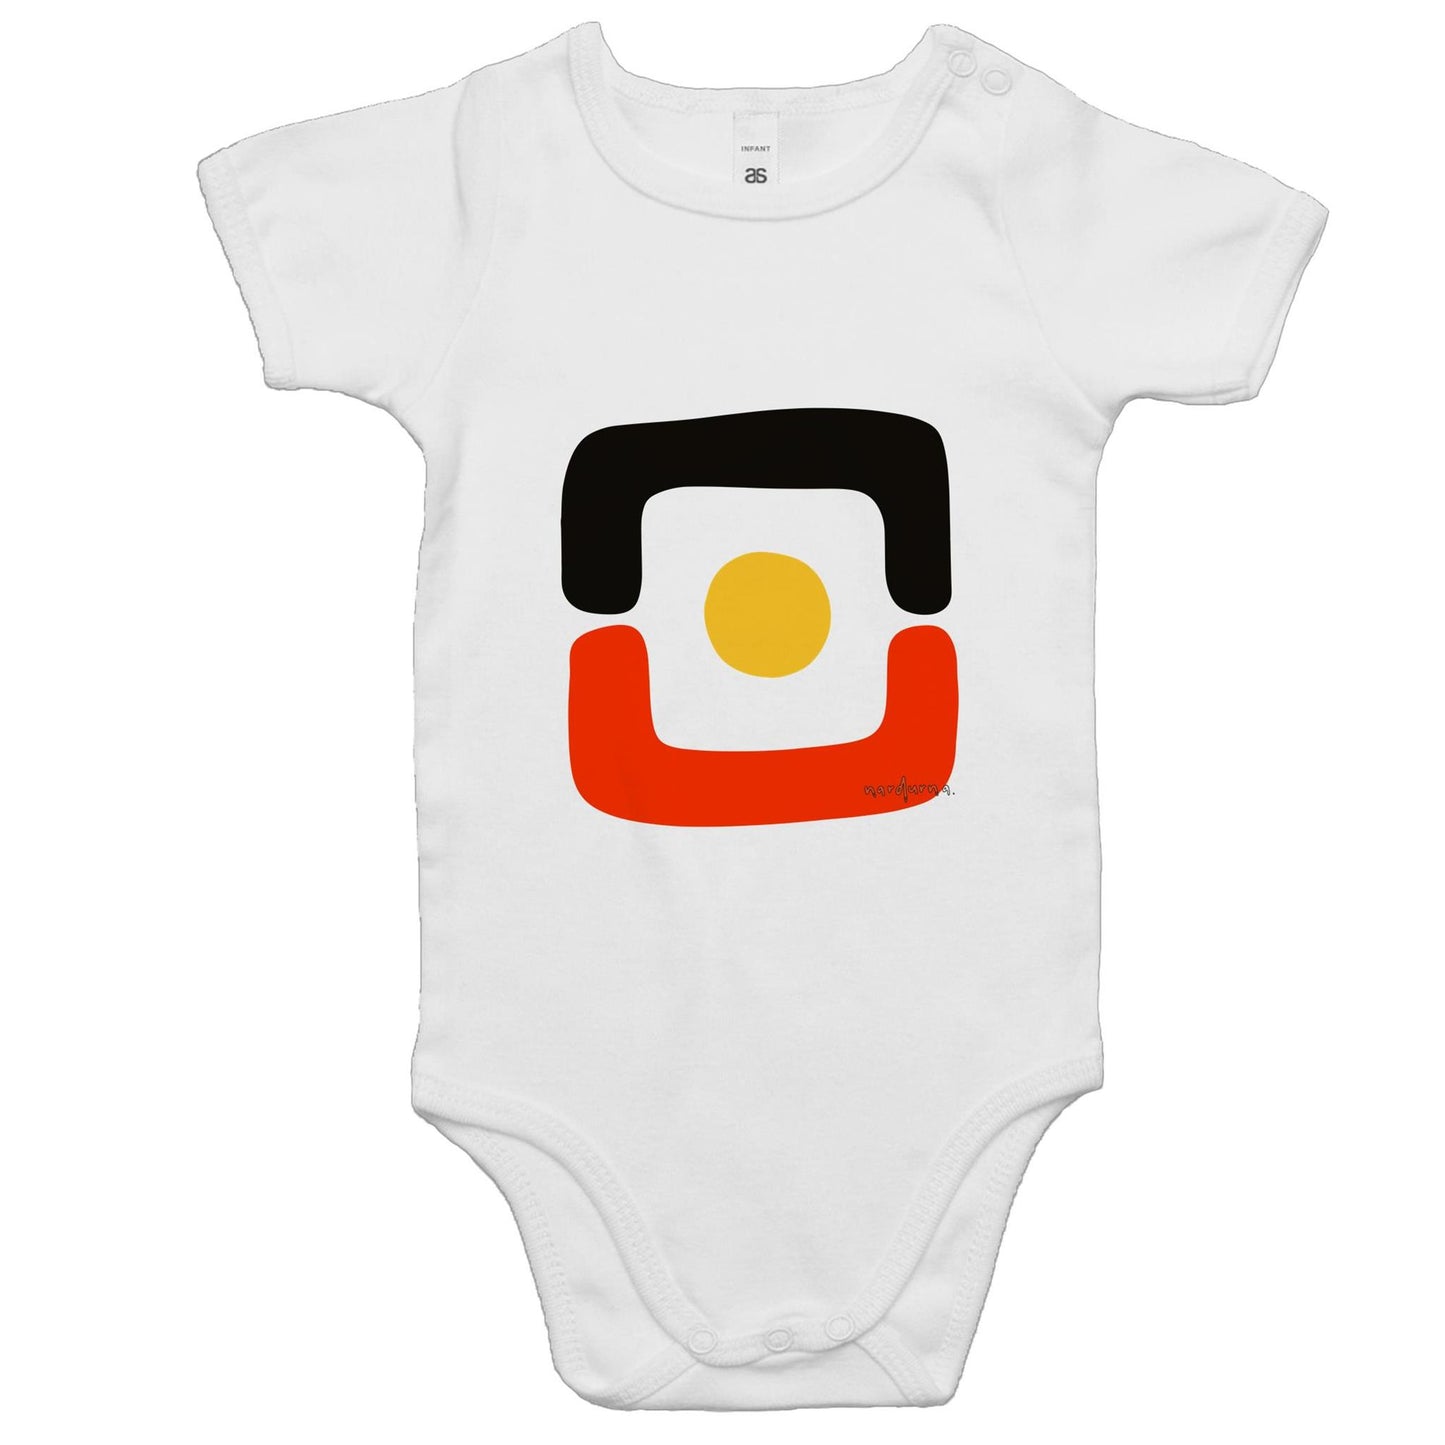 Our colours baby onesie romper